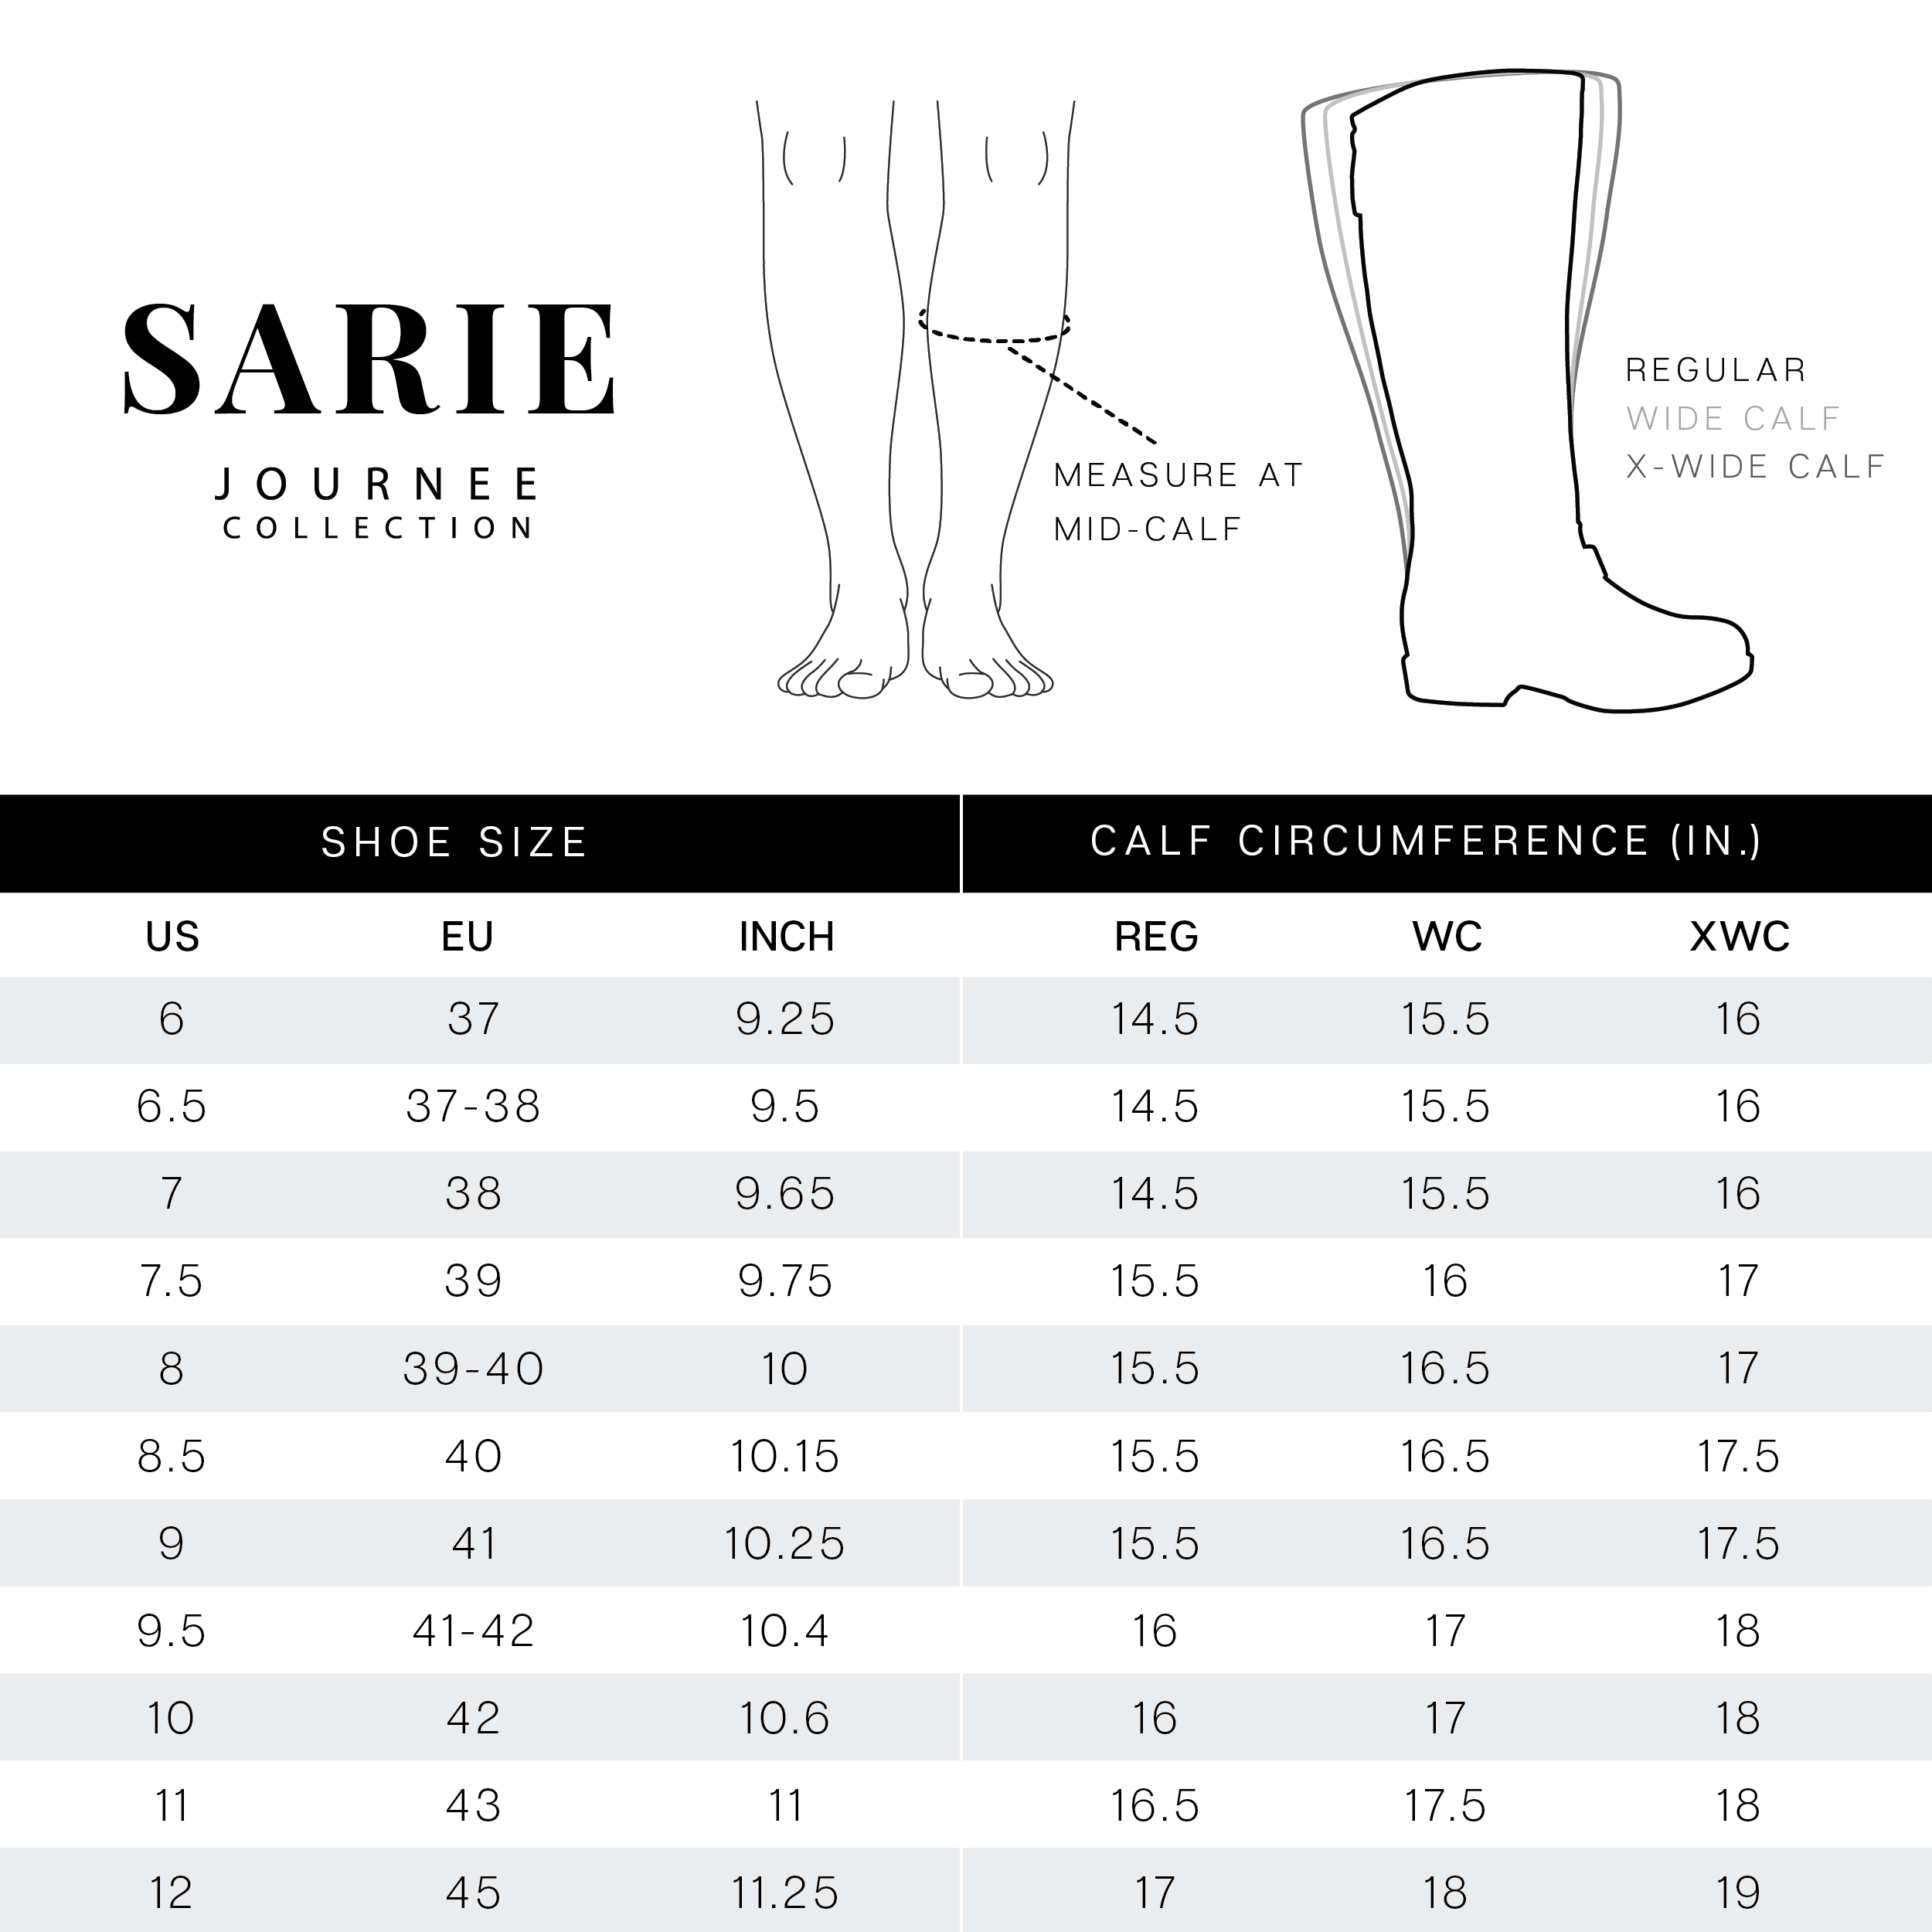 SARIE WIDE CALF - Journee Collection